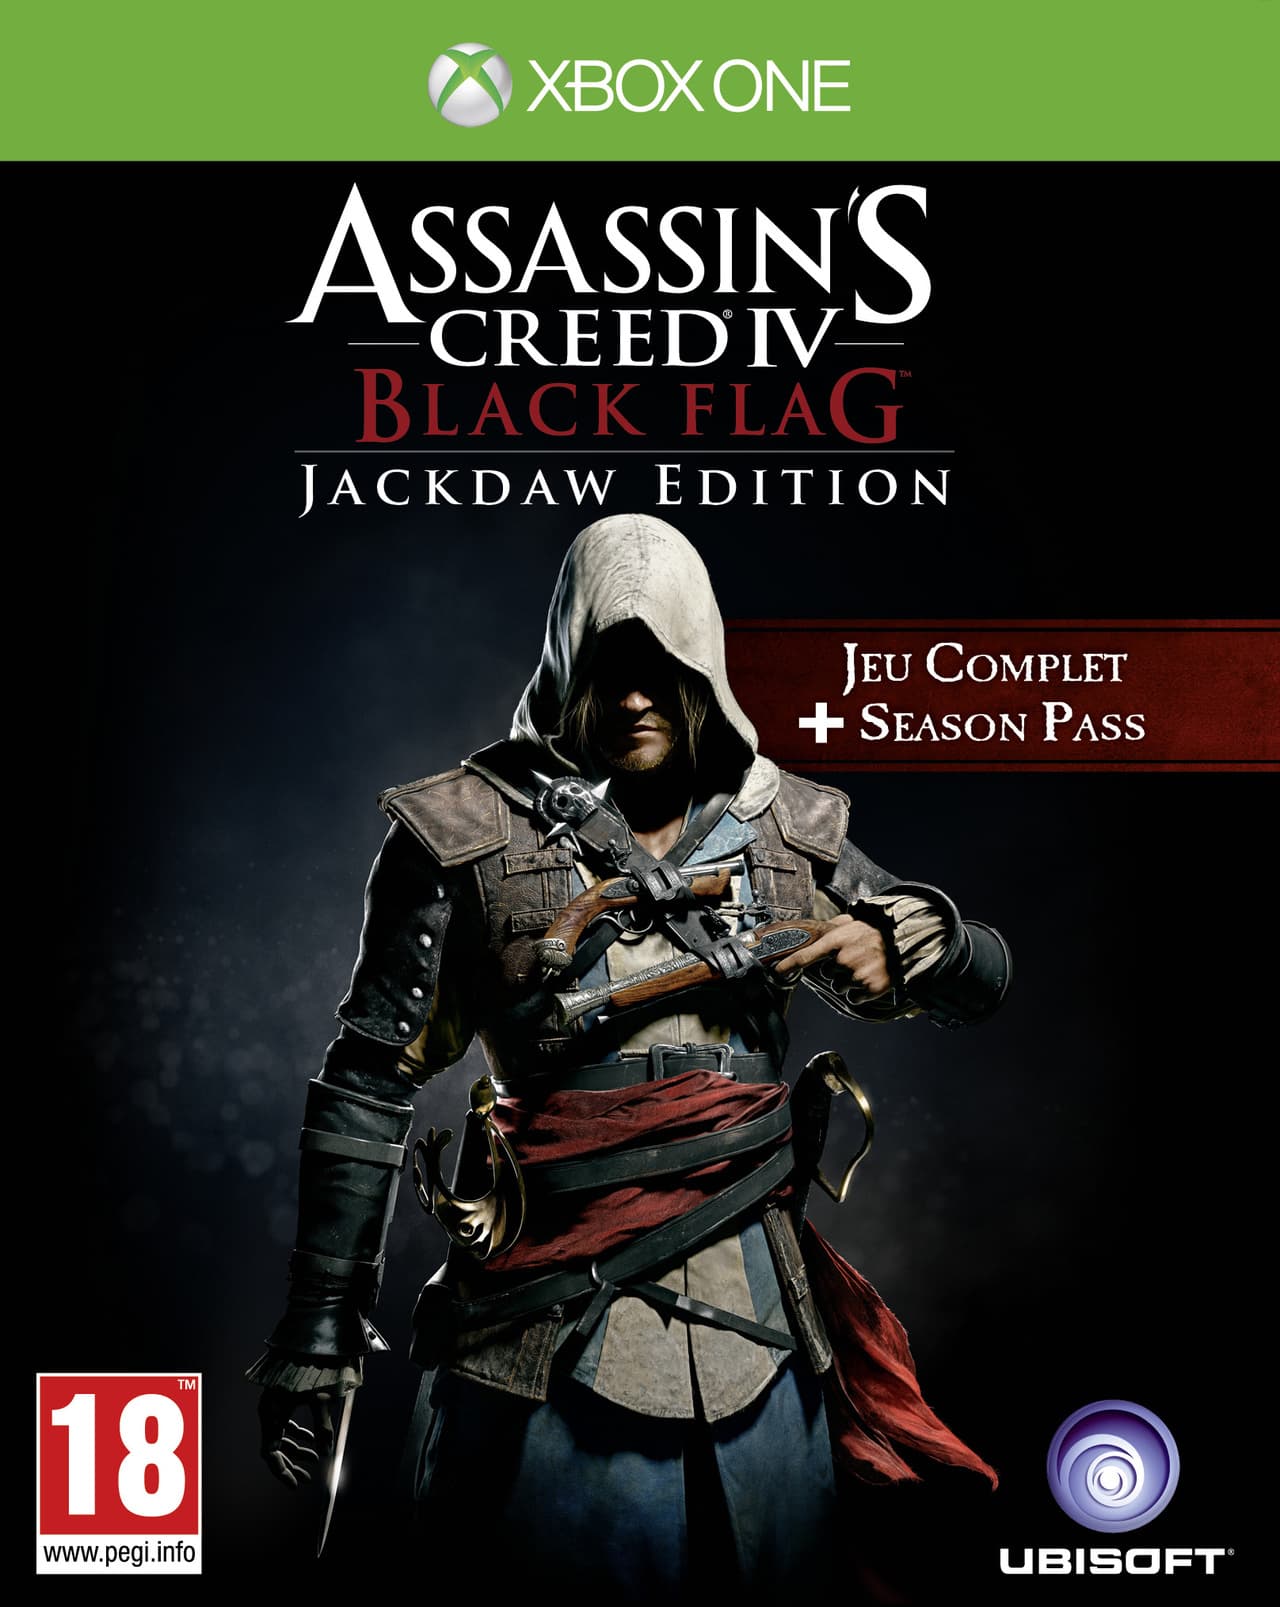 Jaquette Assassin's Creed IV : Black Flag - Jackdaw Edition